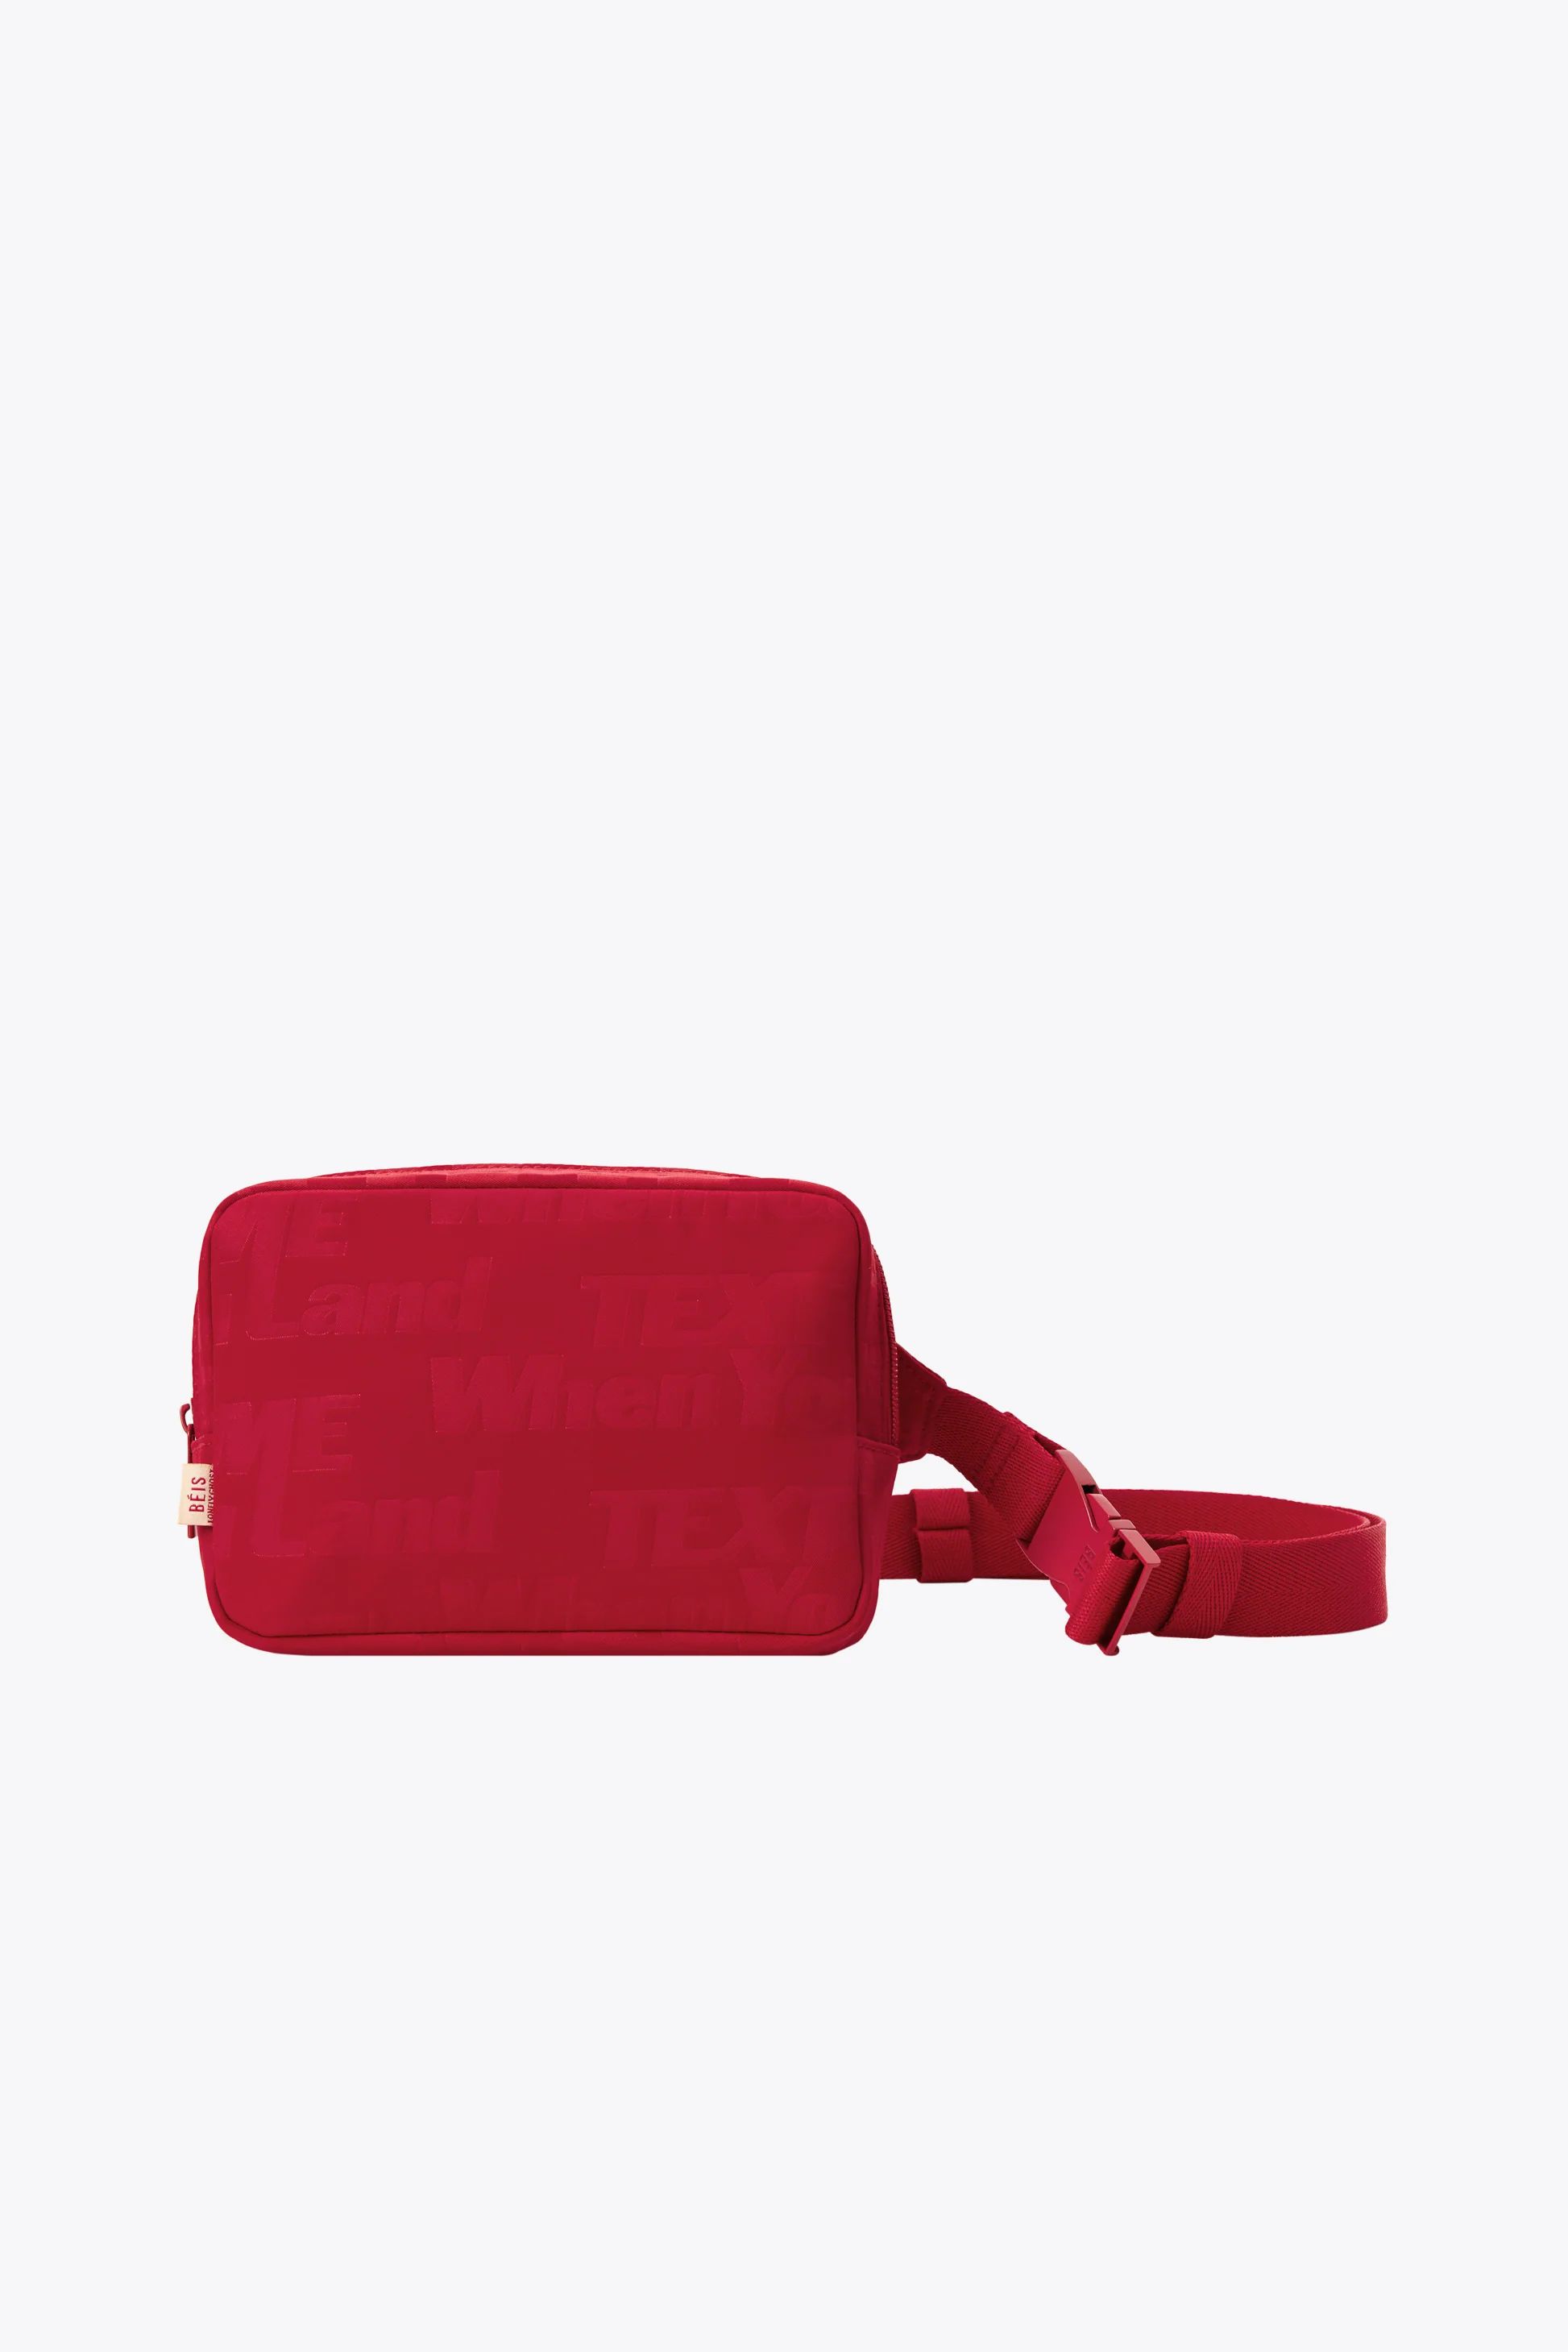 THE BELT BAG IN TEXT ME RED | BÉIS Travel